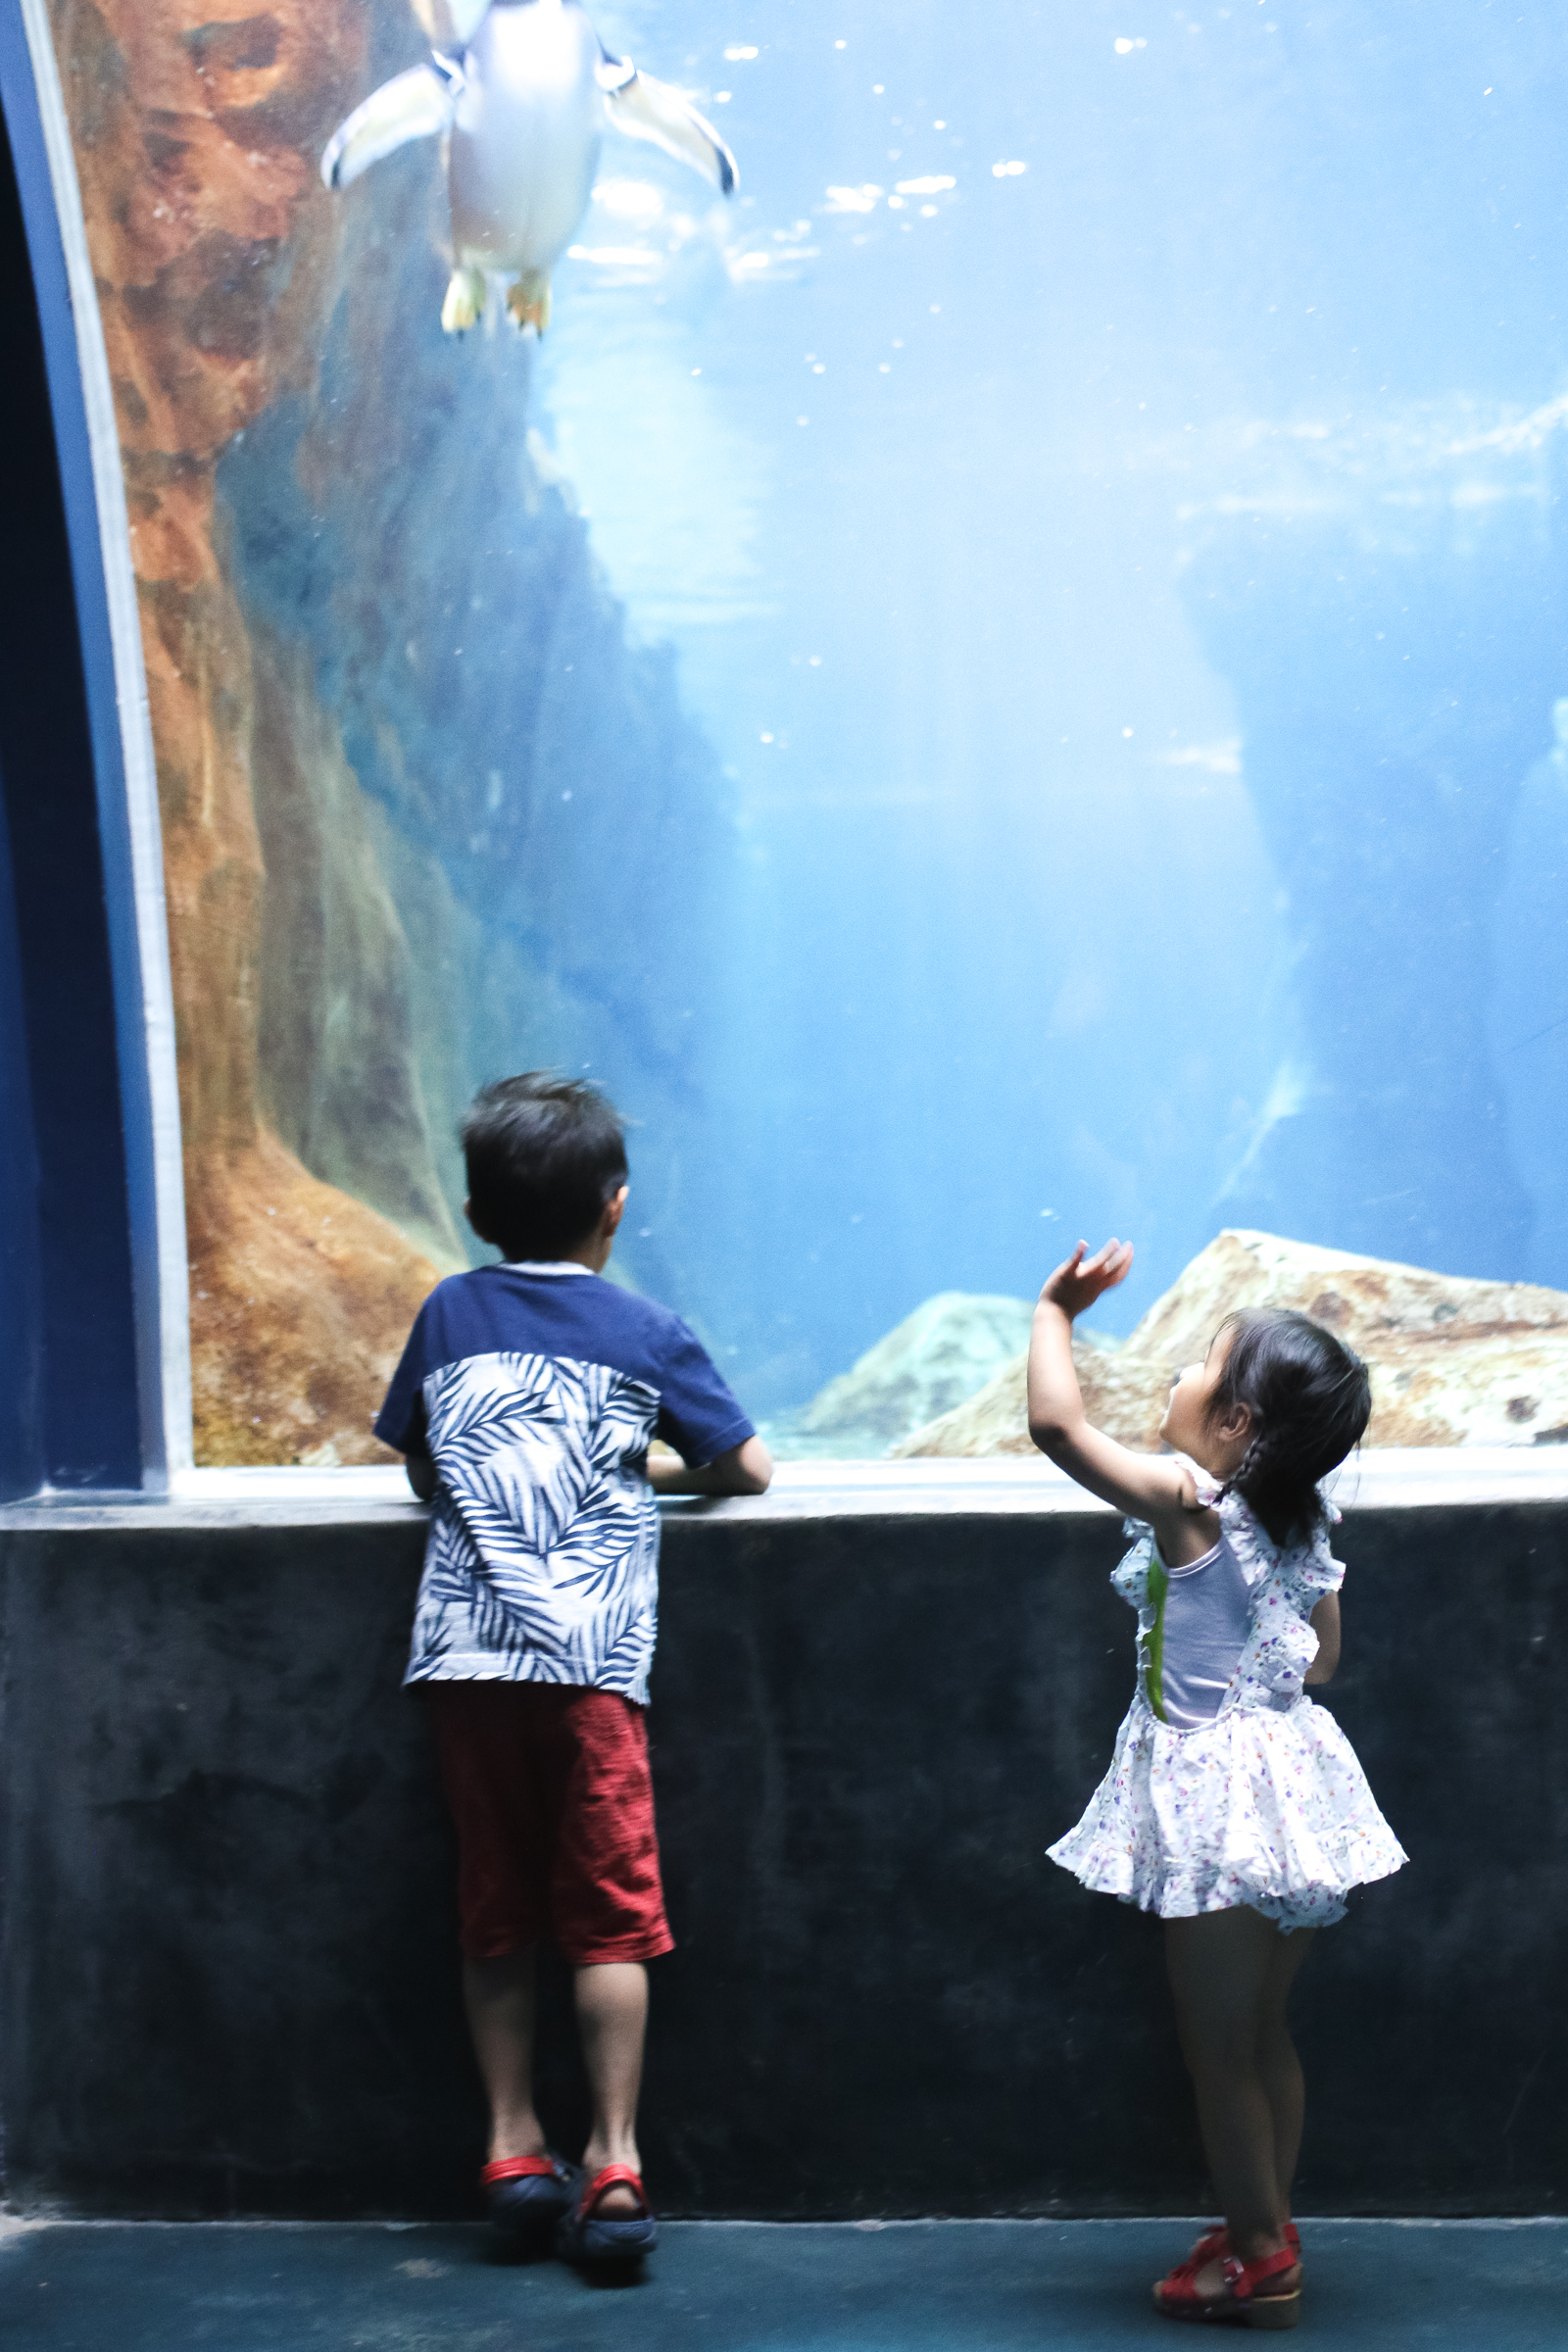 3 Tips to Visit the Loveland Living Planet Aquarium With Your Family by popular blogger Sandy A La Mode